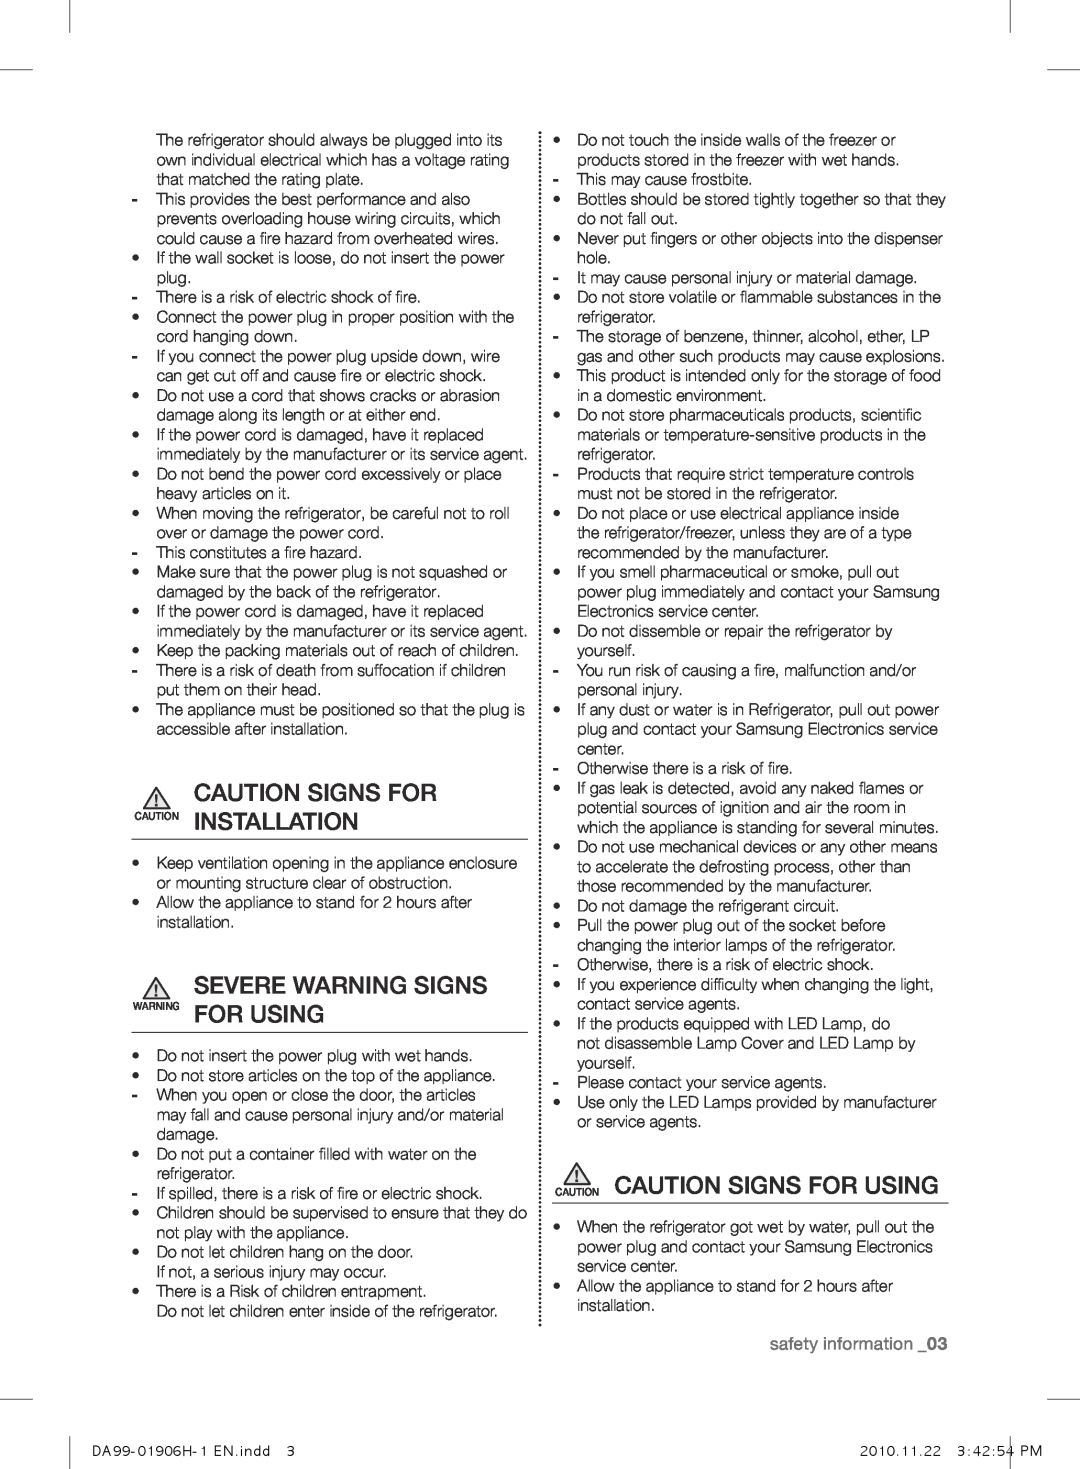 Samsung RT59NBPN1/XEF Caution signs for CAUTION instaLLation, sEVErE warning signs WARNING for using, safety information 